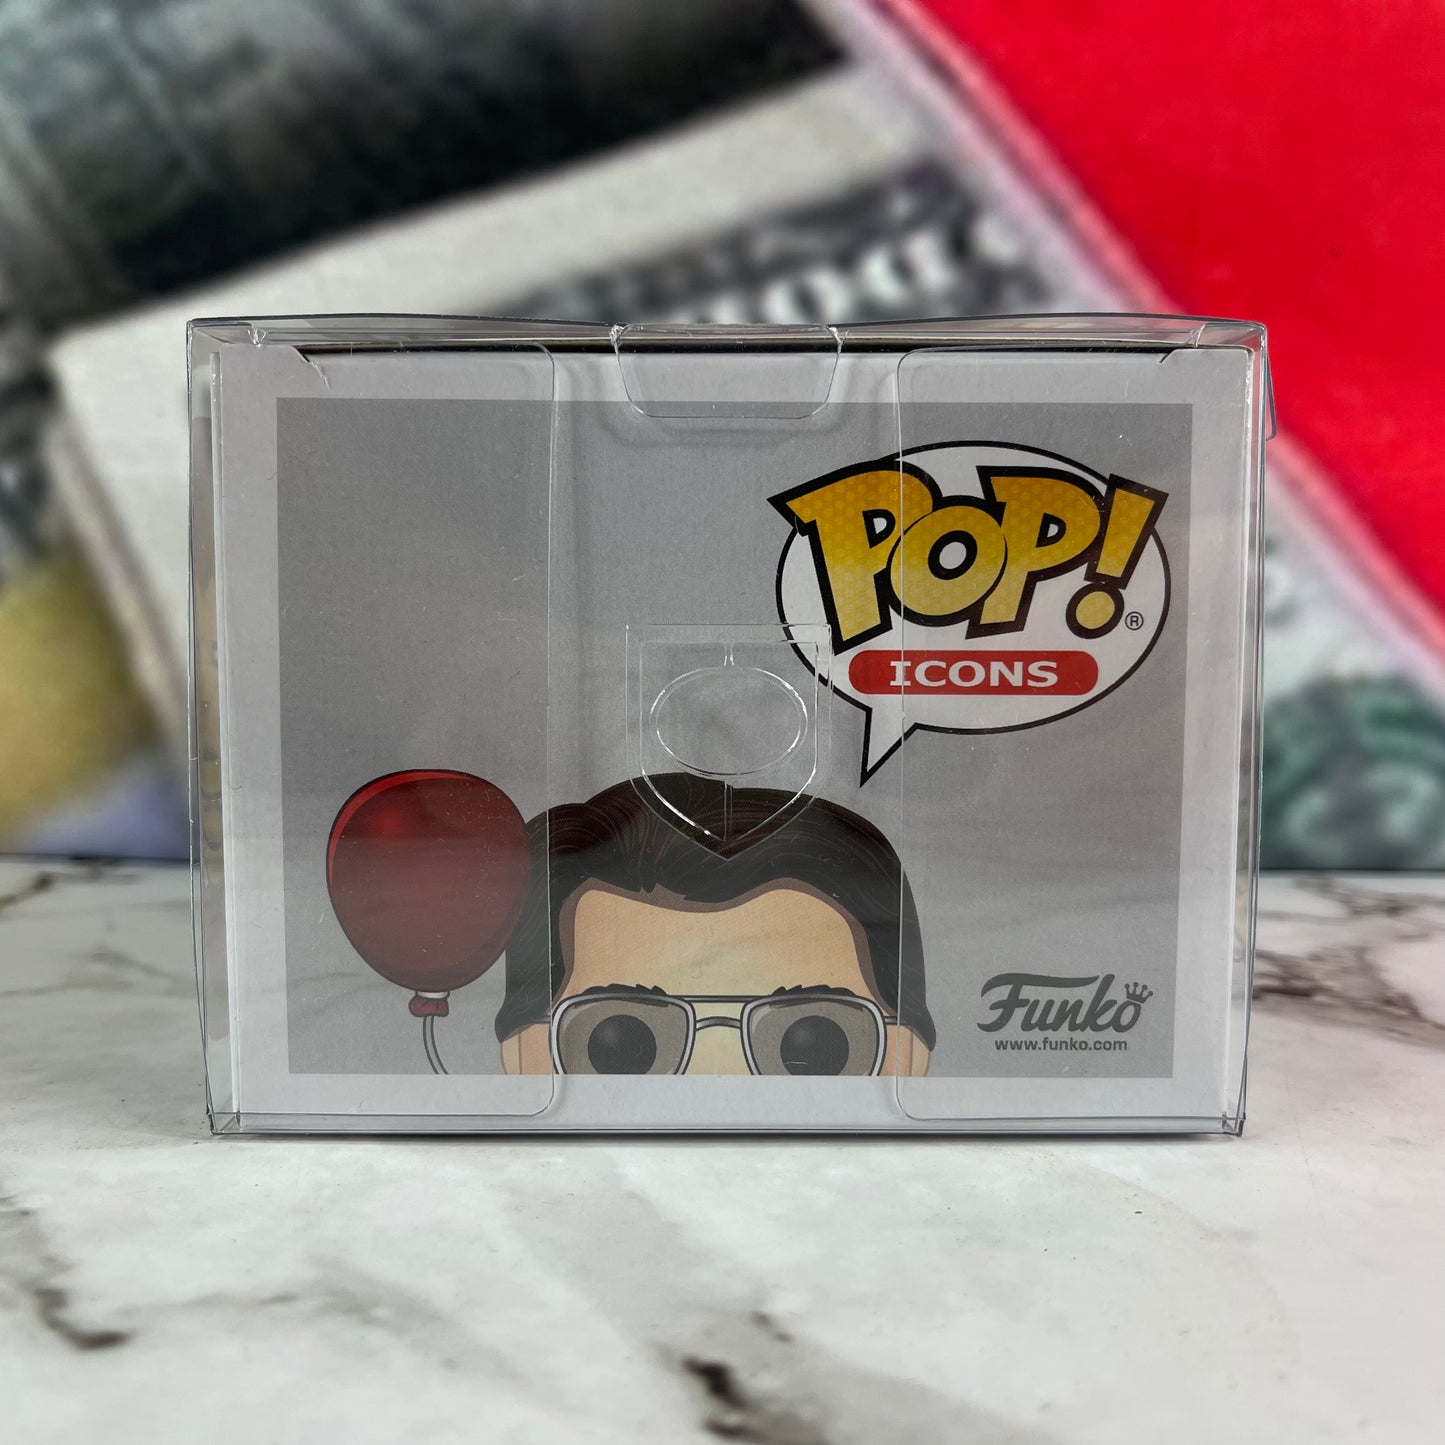 Icons Funko Pop! Stephen King (with Red Balloon) #55